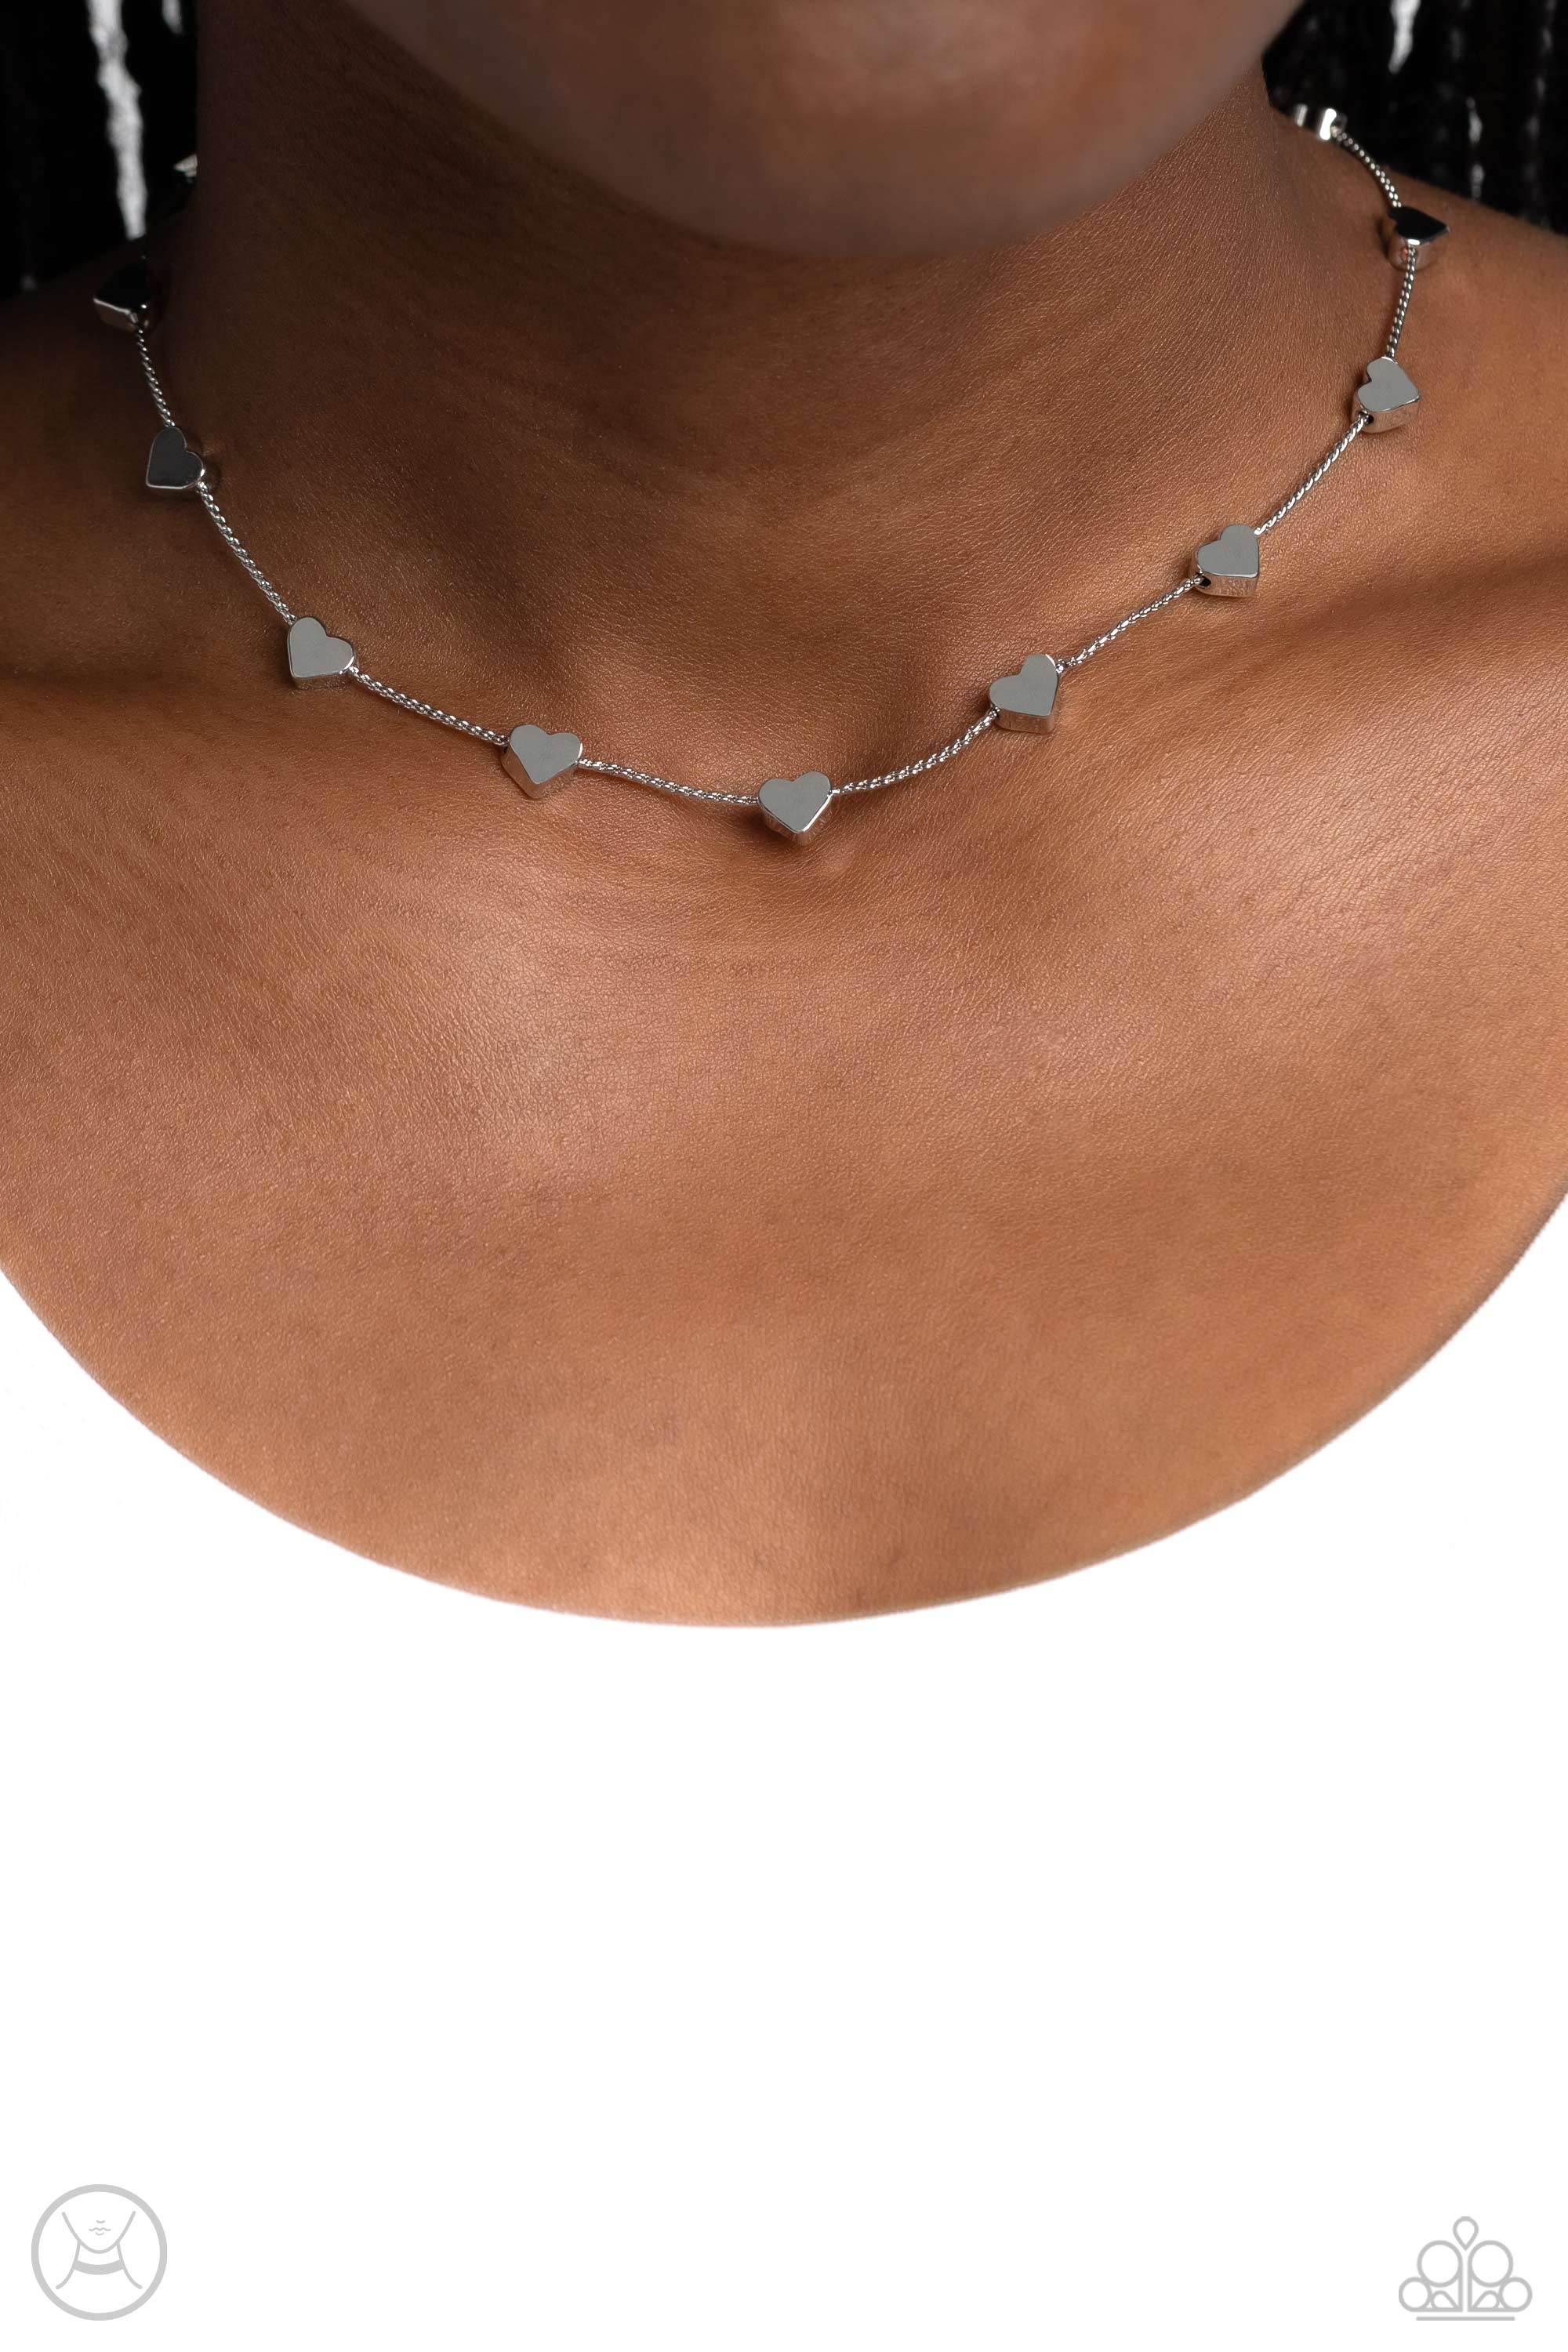 Public Display of Affection Silver Choker